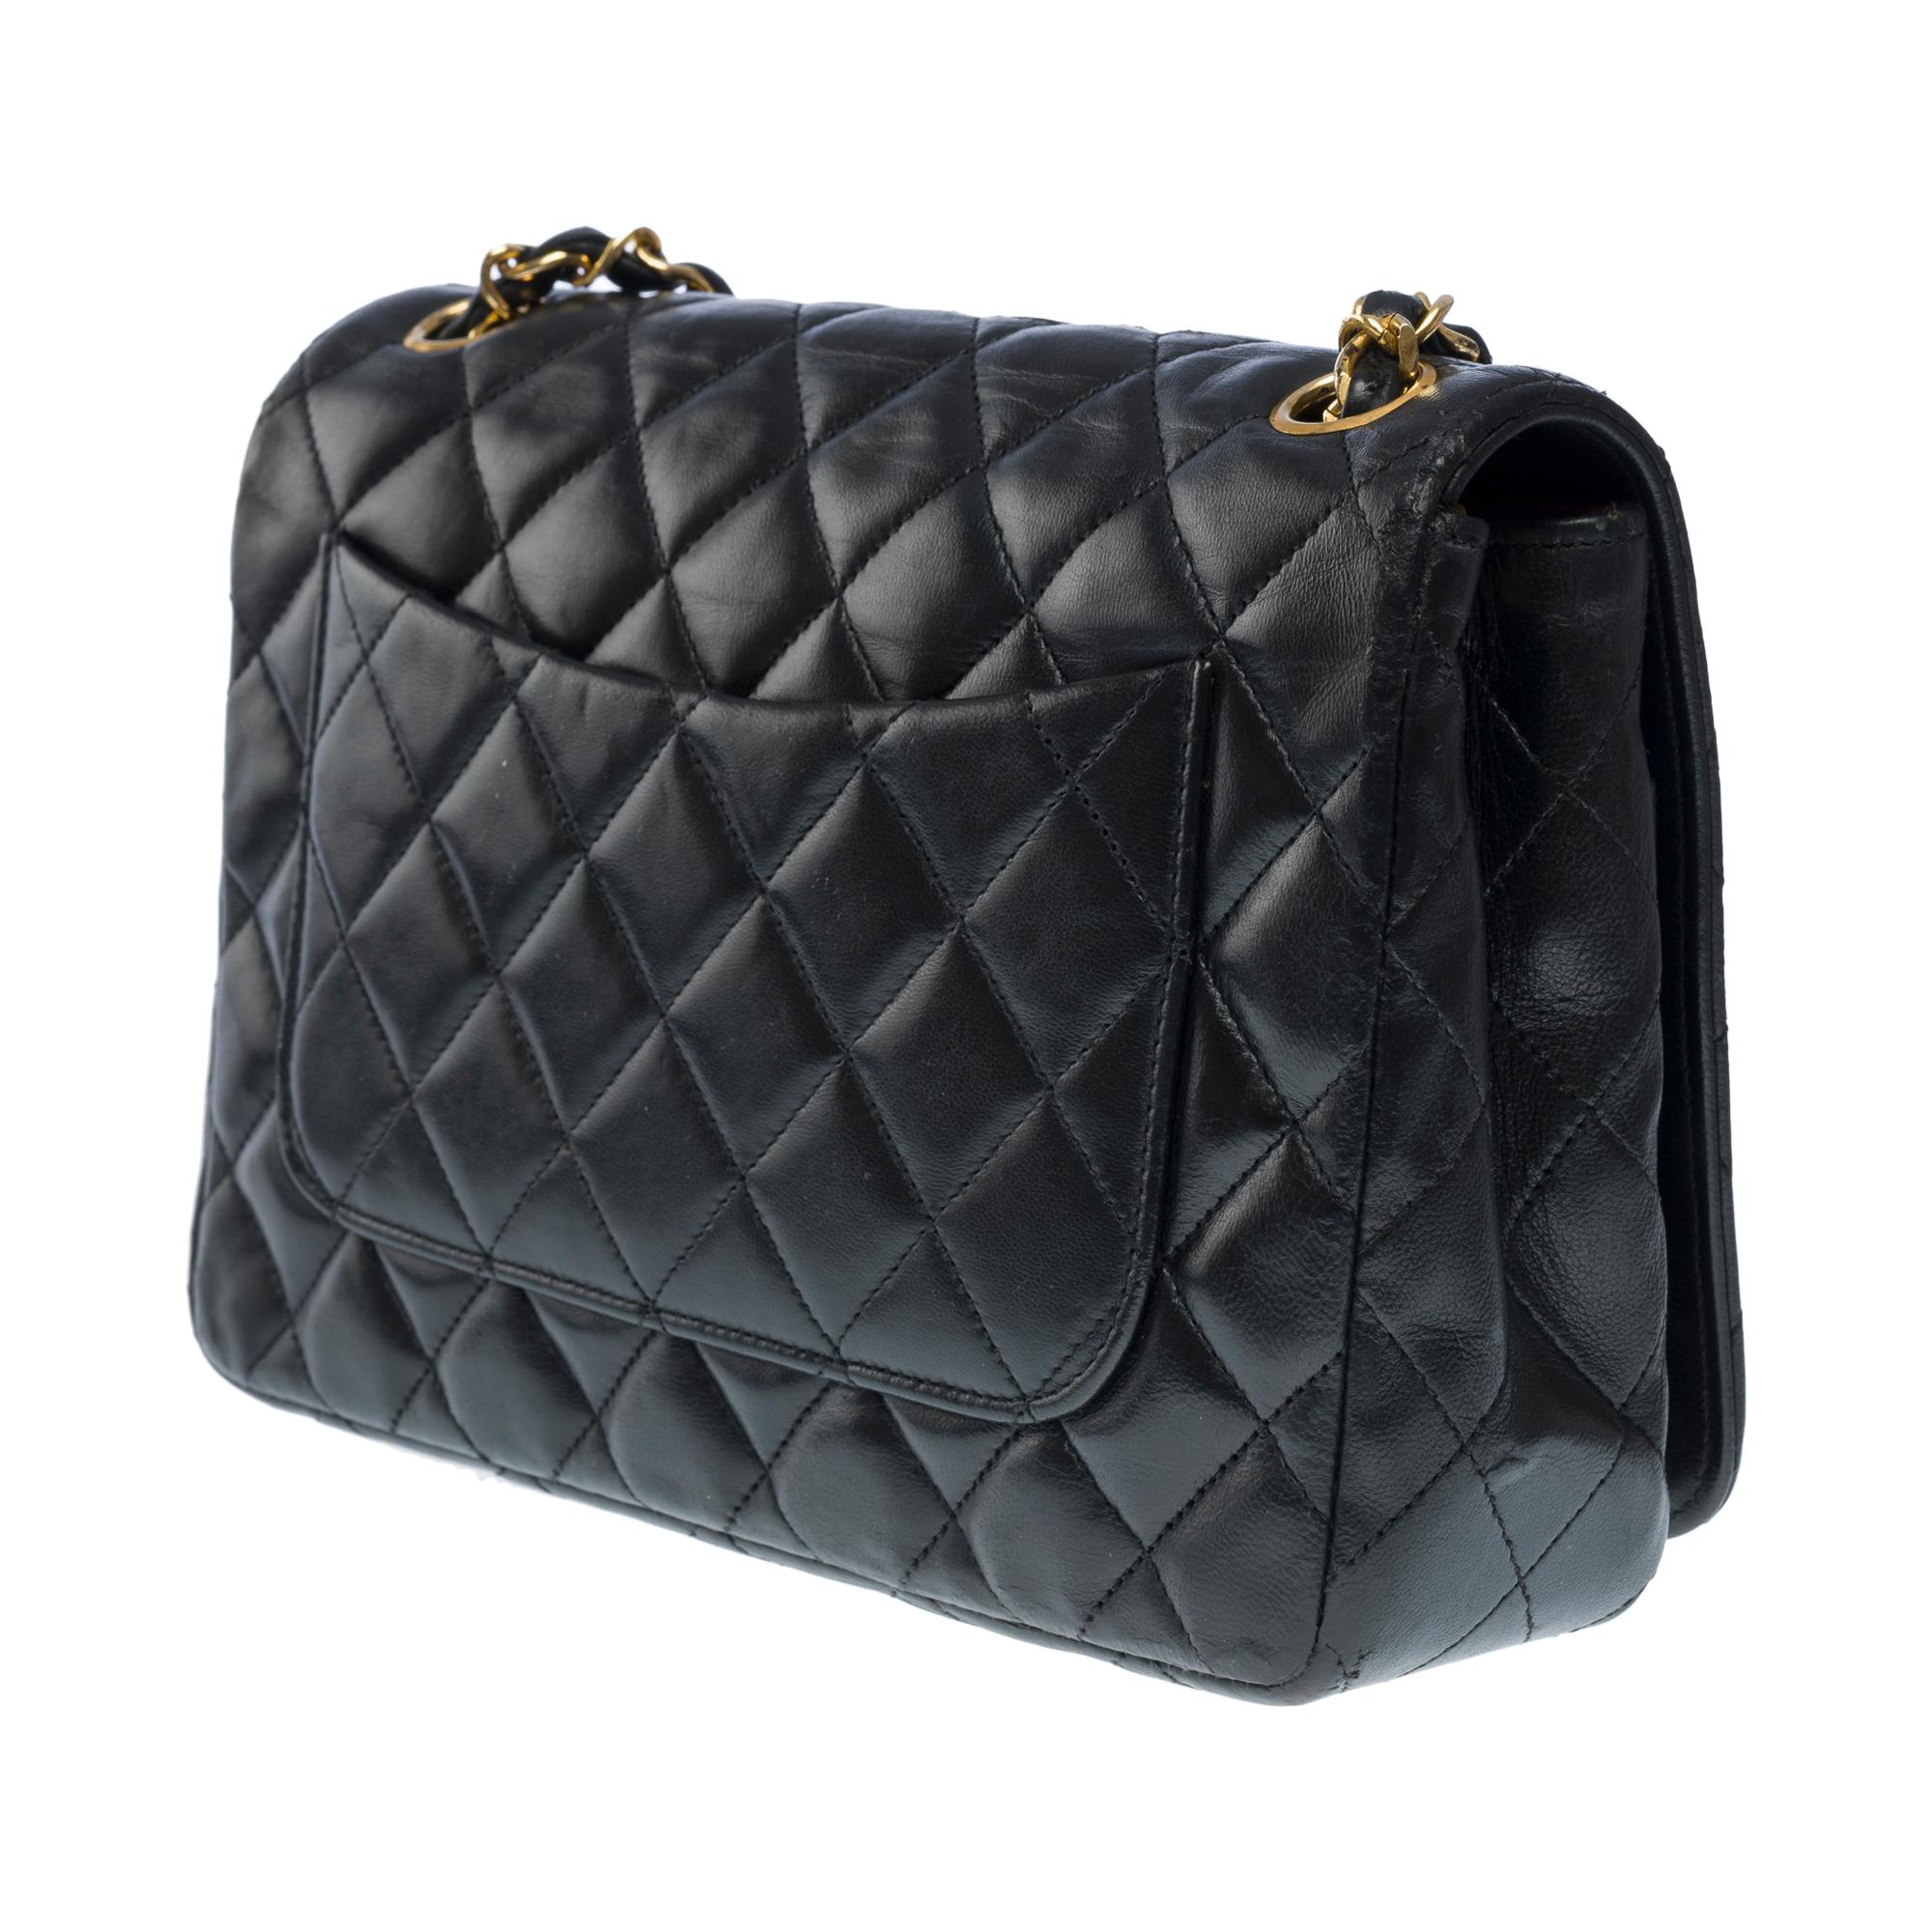 Chanel Classic Full Flap shoulder bag in black quilted lambskin leather, GHW For Sale 2